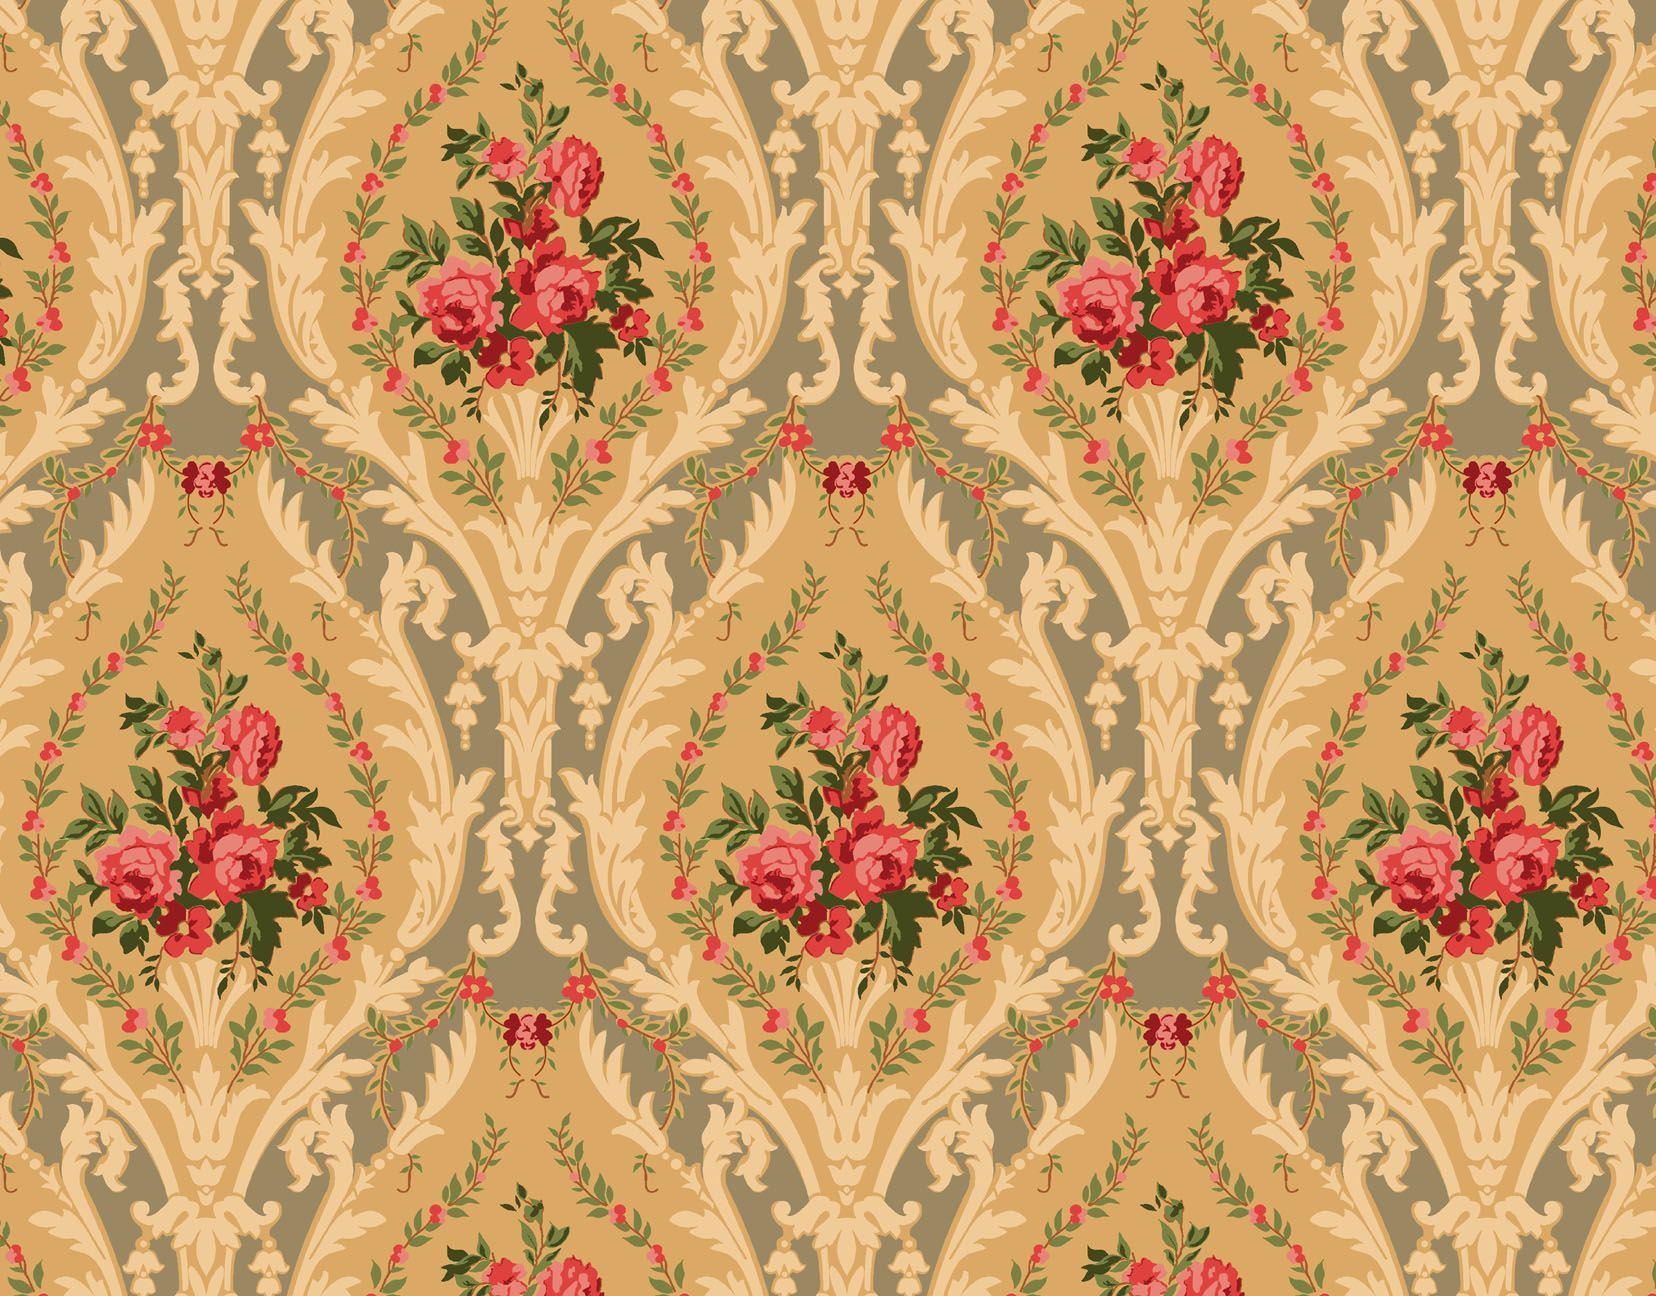 Vintage wallpaper with a floral pattern - Victorian